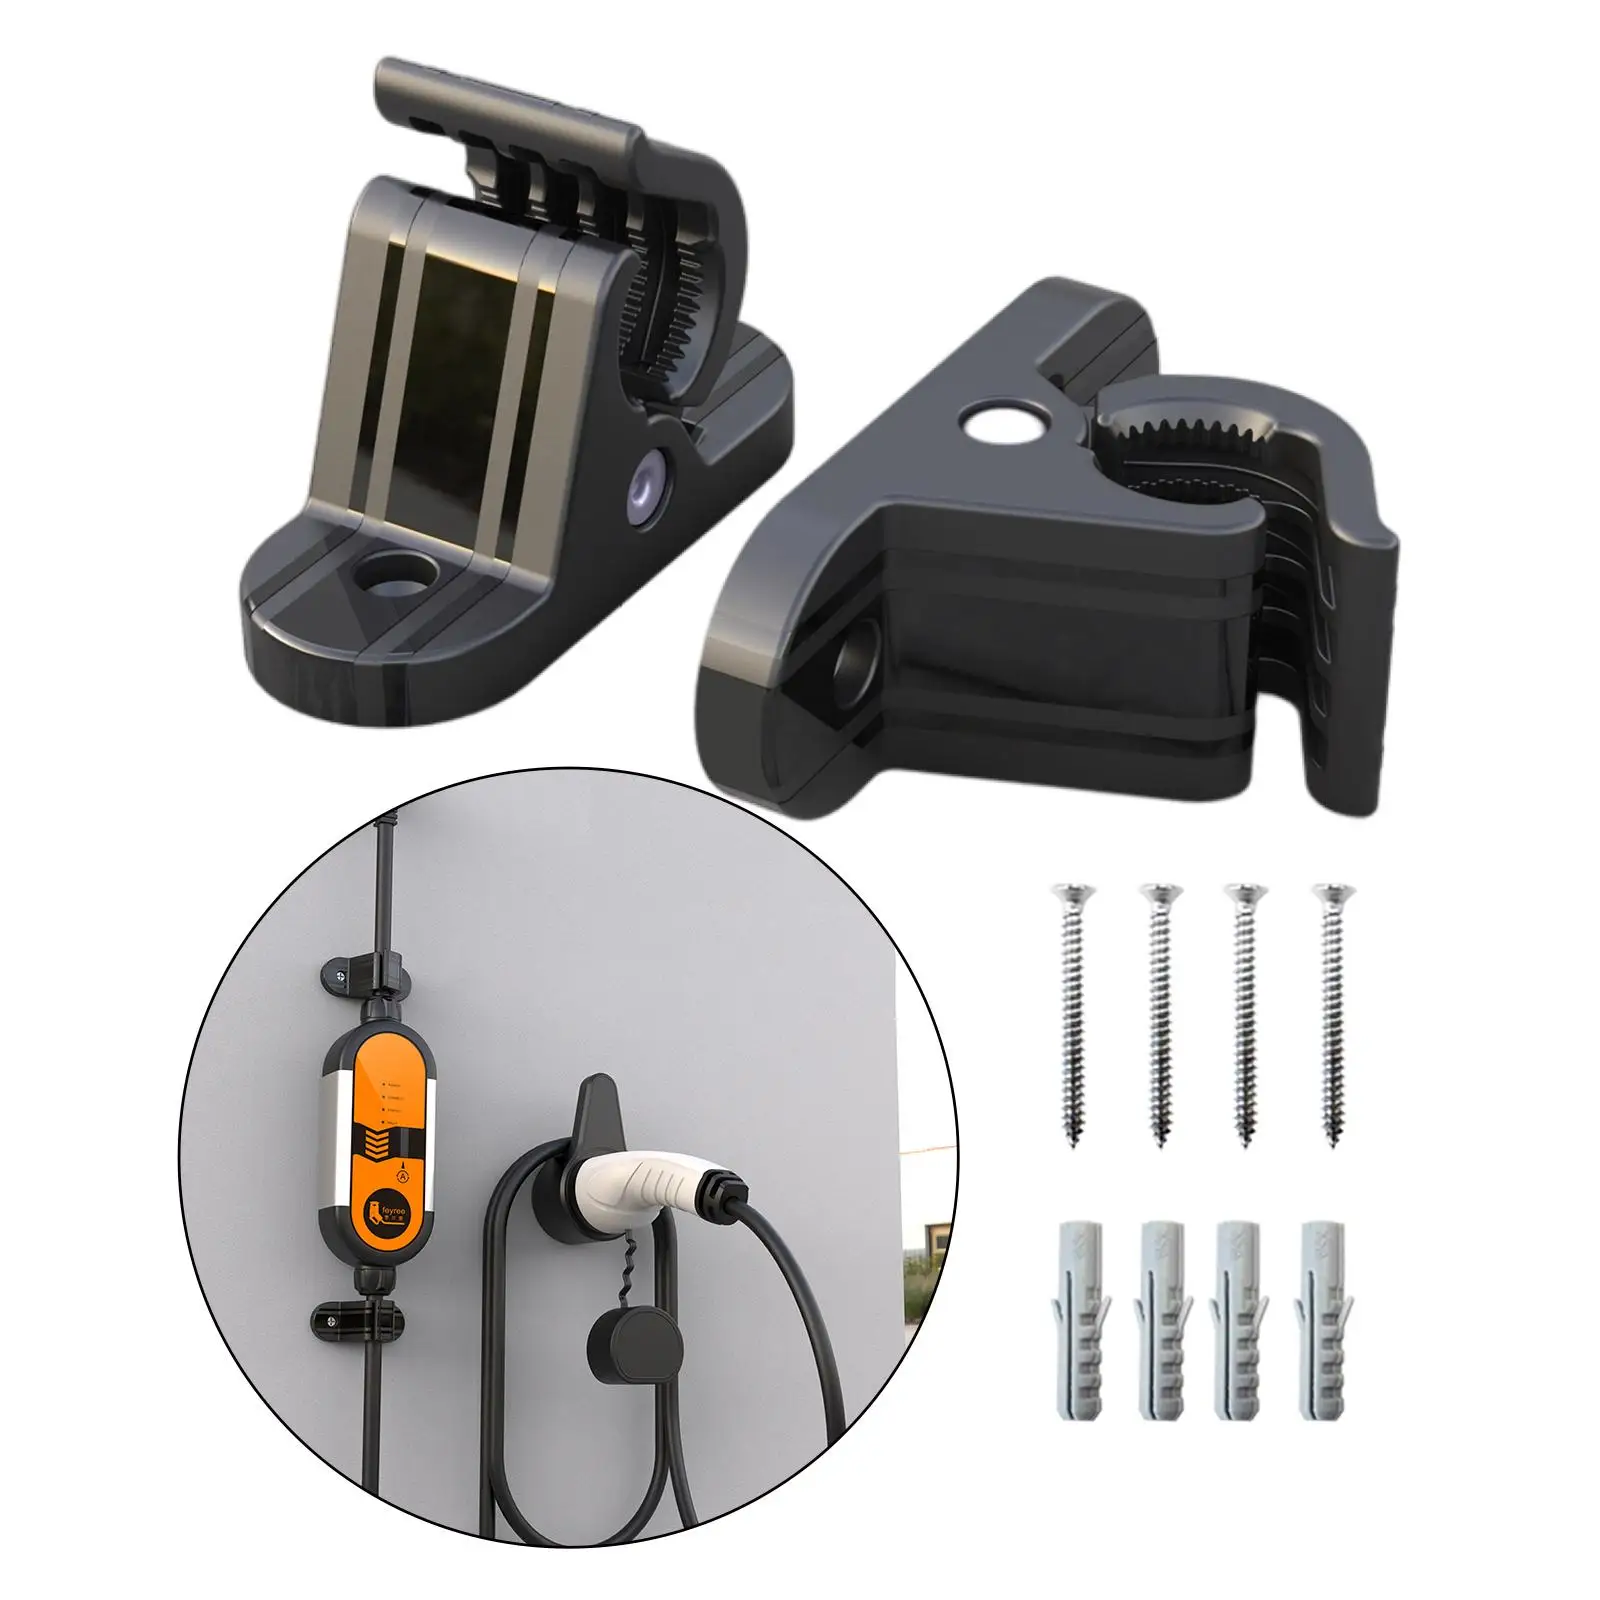 Bracket Clamp Wall Mount Fixed Clip Portable Connector Holster Charger Holder Cable Organizer Universal for EV Car